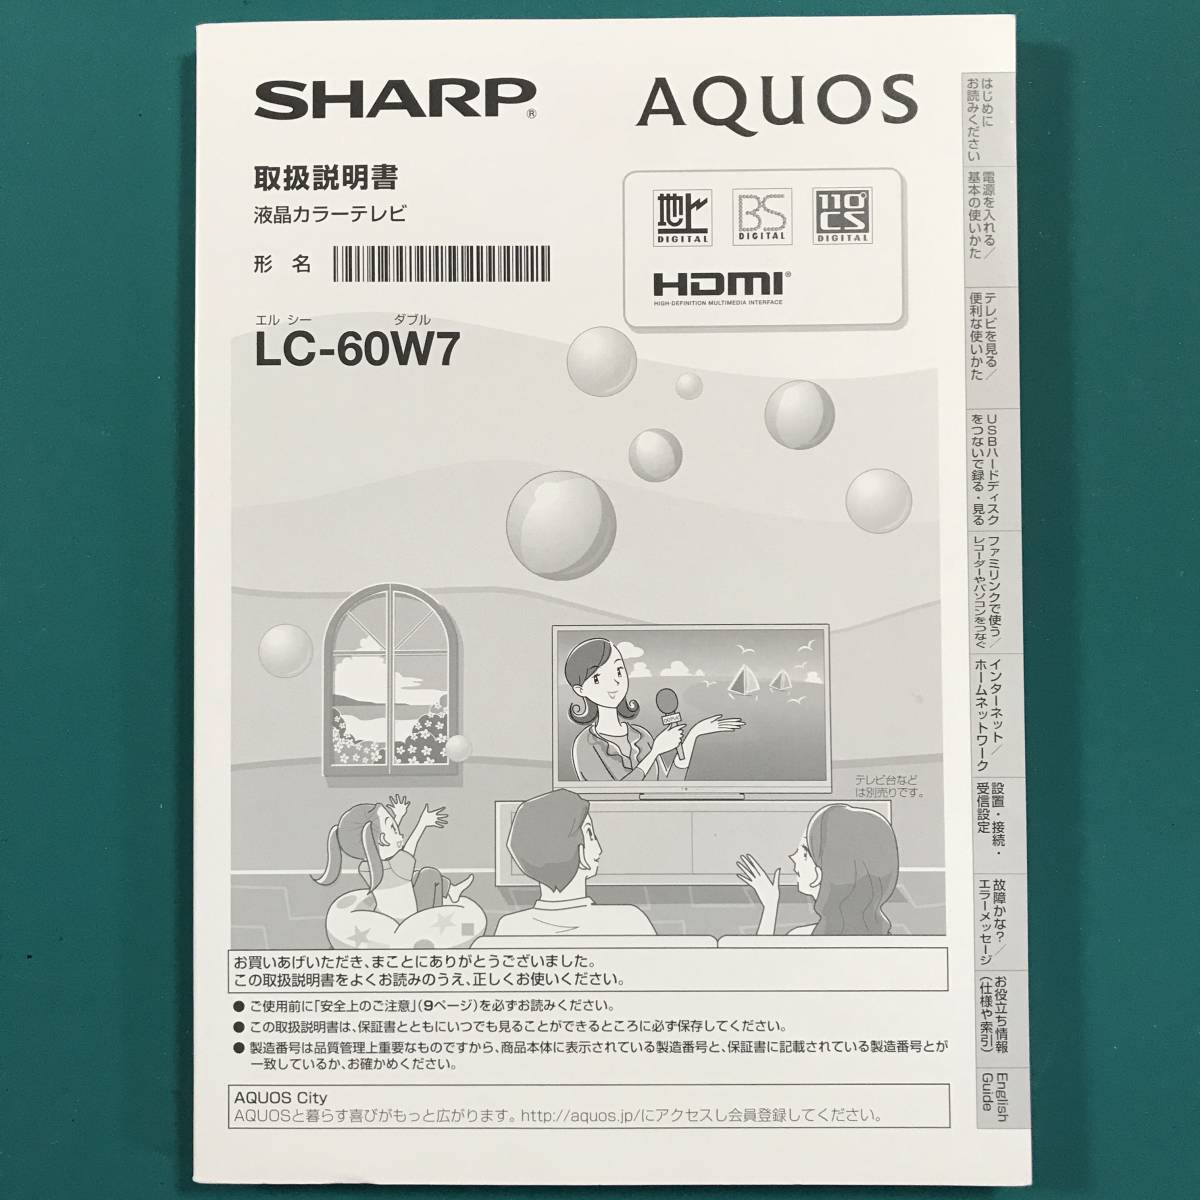  sharp AQUOS LC-60W7 owner manual secondhand goods R01100